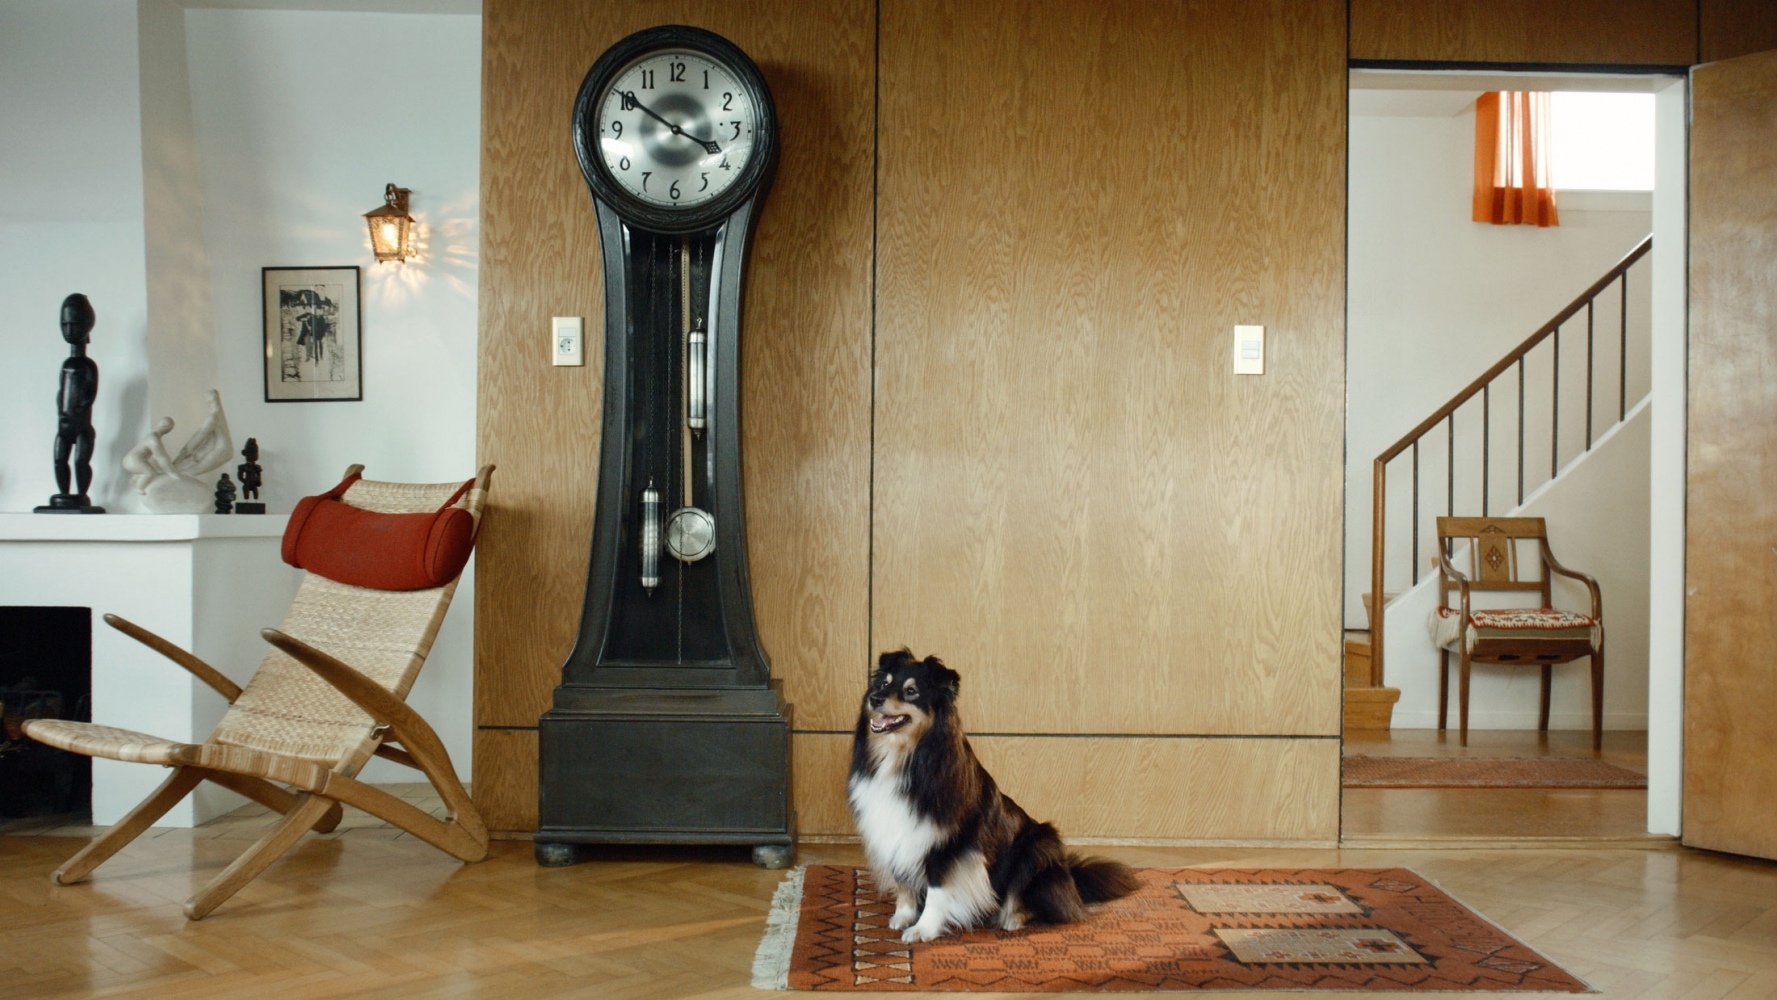 Ragnar Kjartansson
Scenes from Western Culture, Dog and Clock, 2015
Single-channel video with sound
Duration: 19 minutes